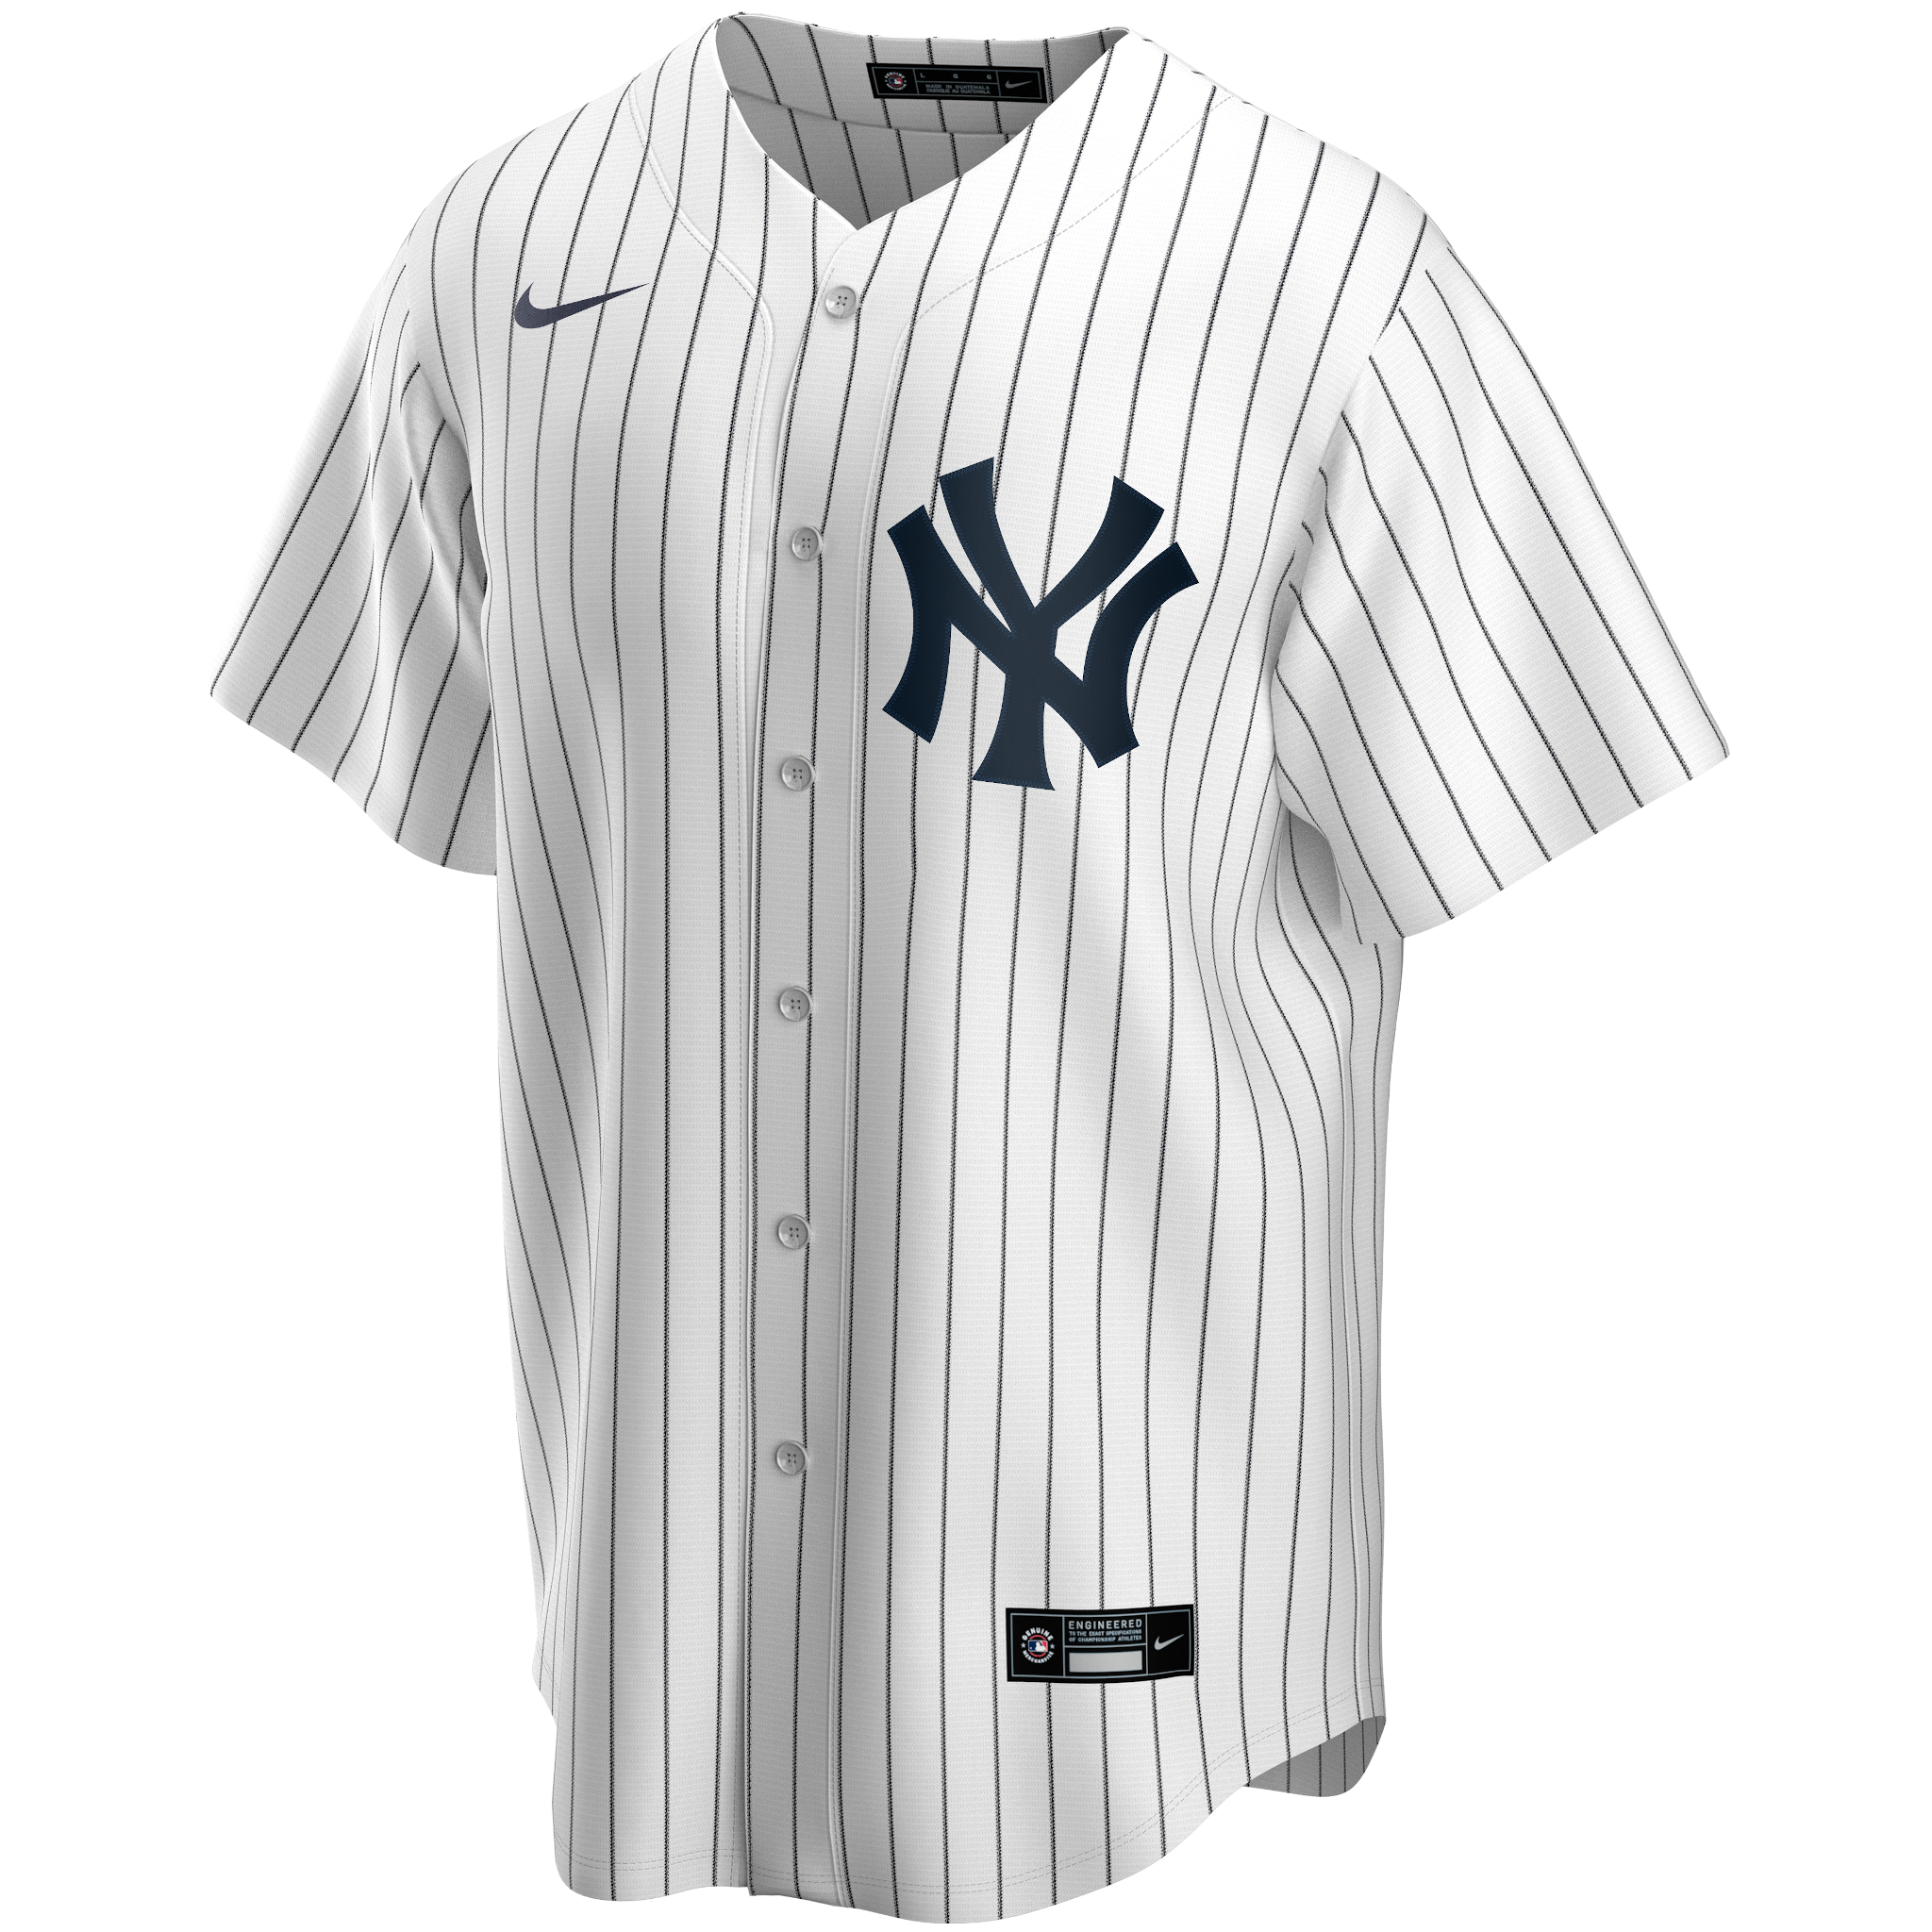 Fanatics Authentic DJ LeMahieu New York Yankees Game-Used #26 White Pinstripe Jersey vs. Houston Astros on August 6, 2023